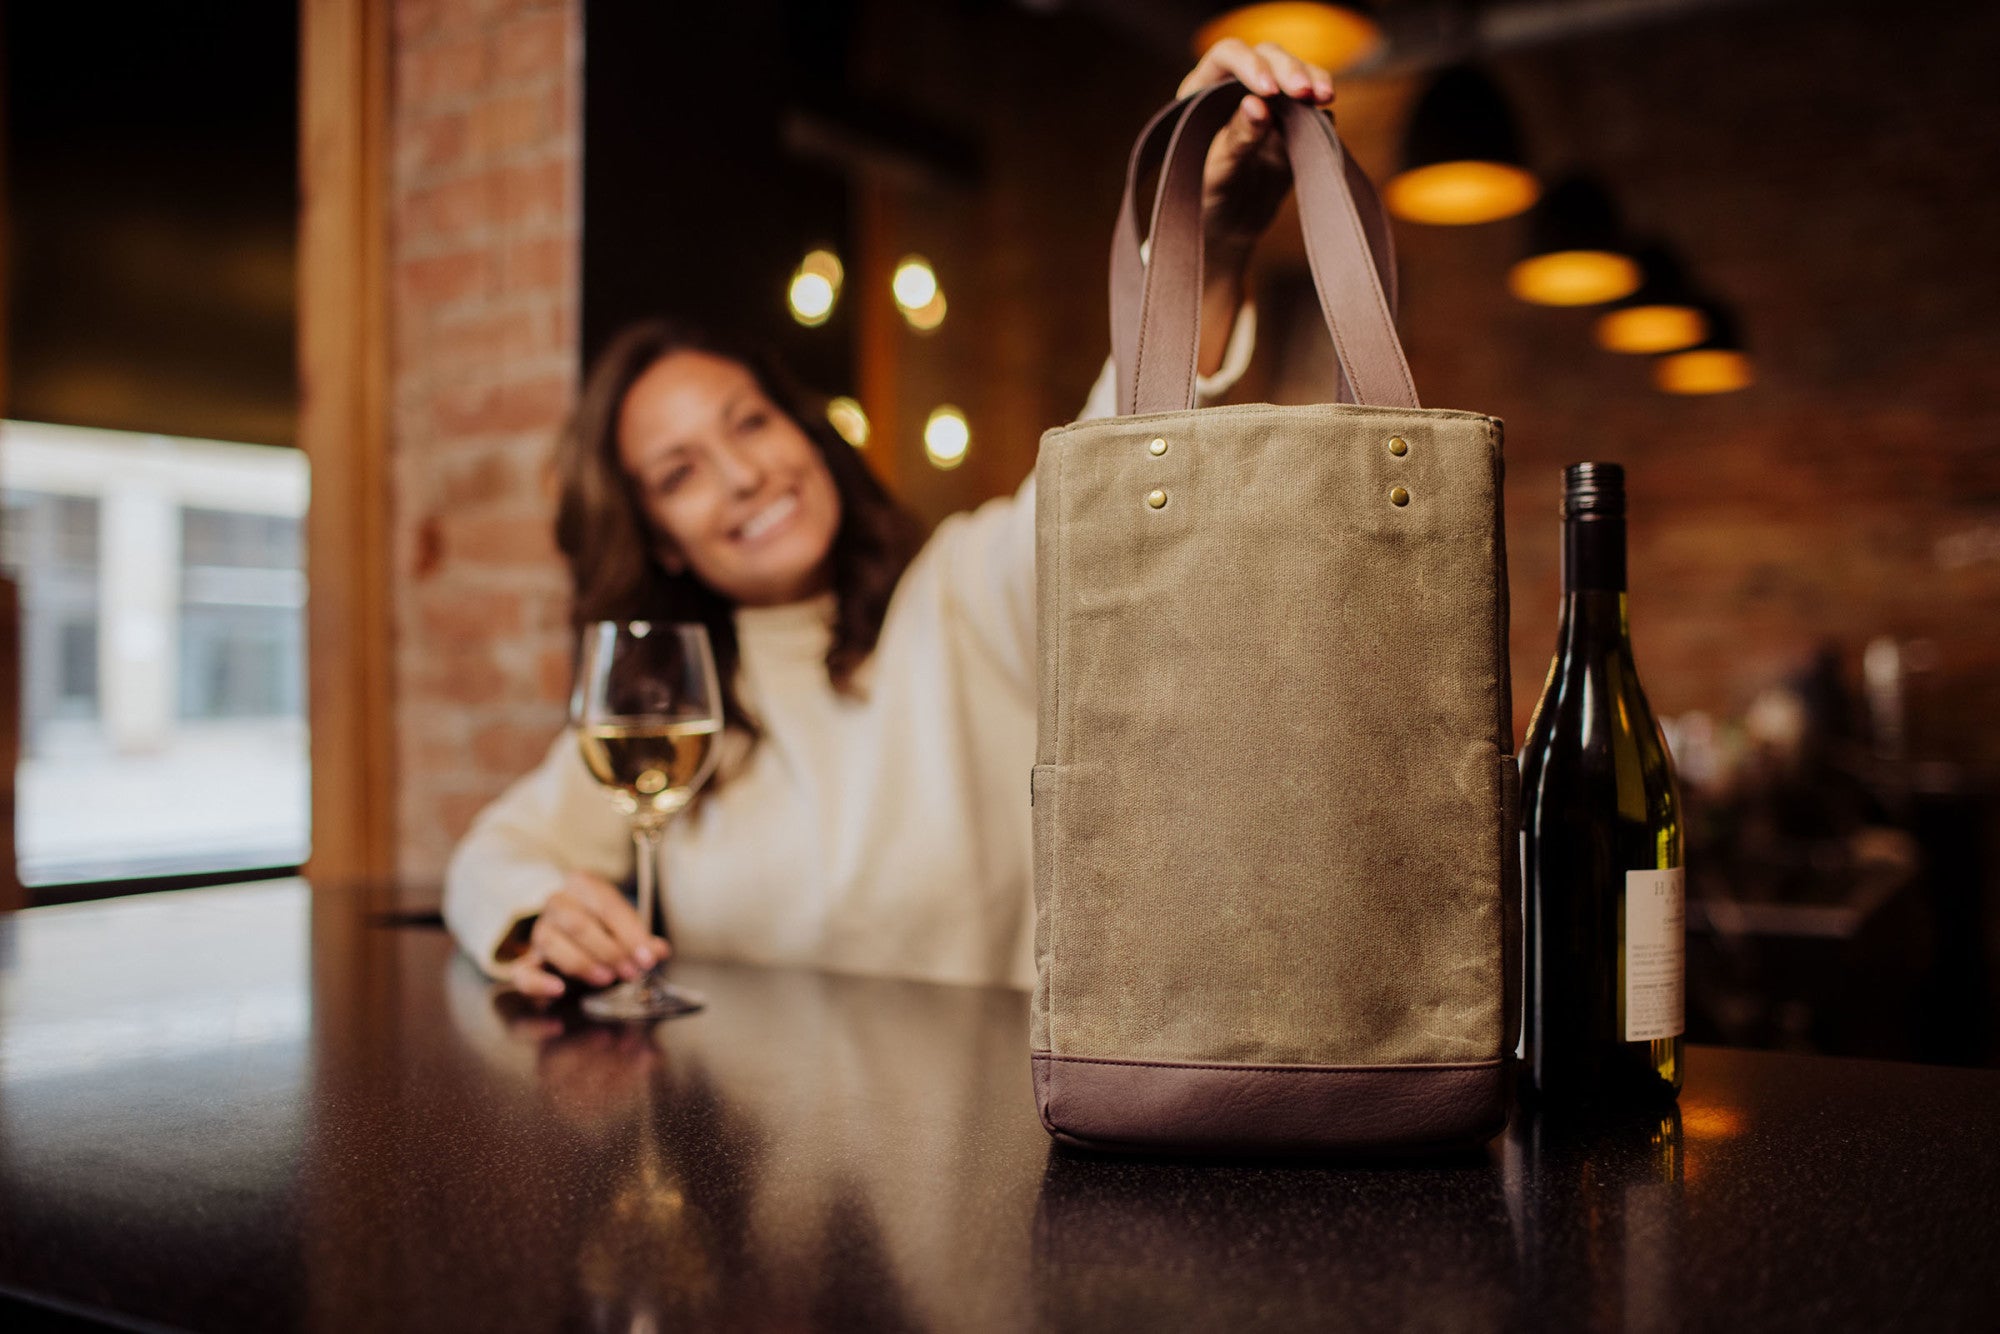 Buy Greenfield Collection Insulated Duo Wine Bottle Cooler Bag for